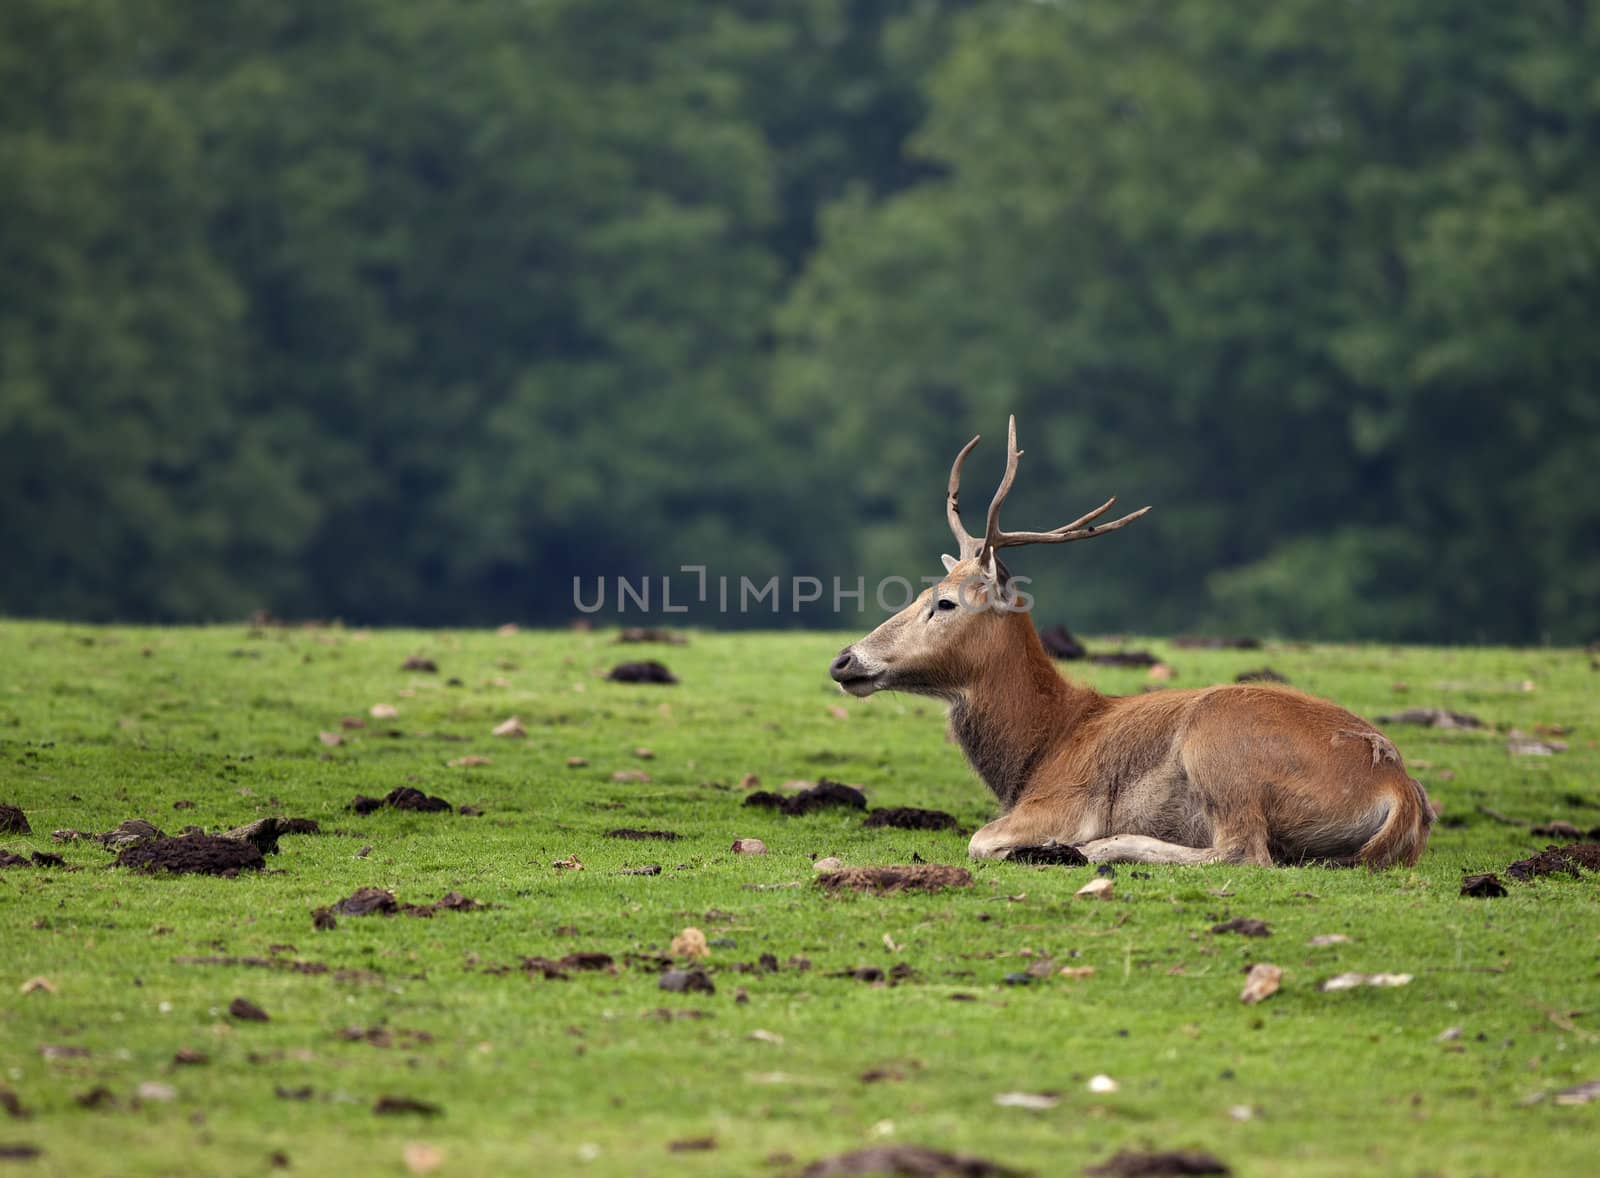 A red deer laying in an open field with the wooded trees in the background.